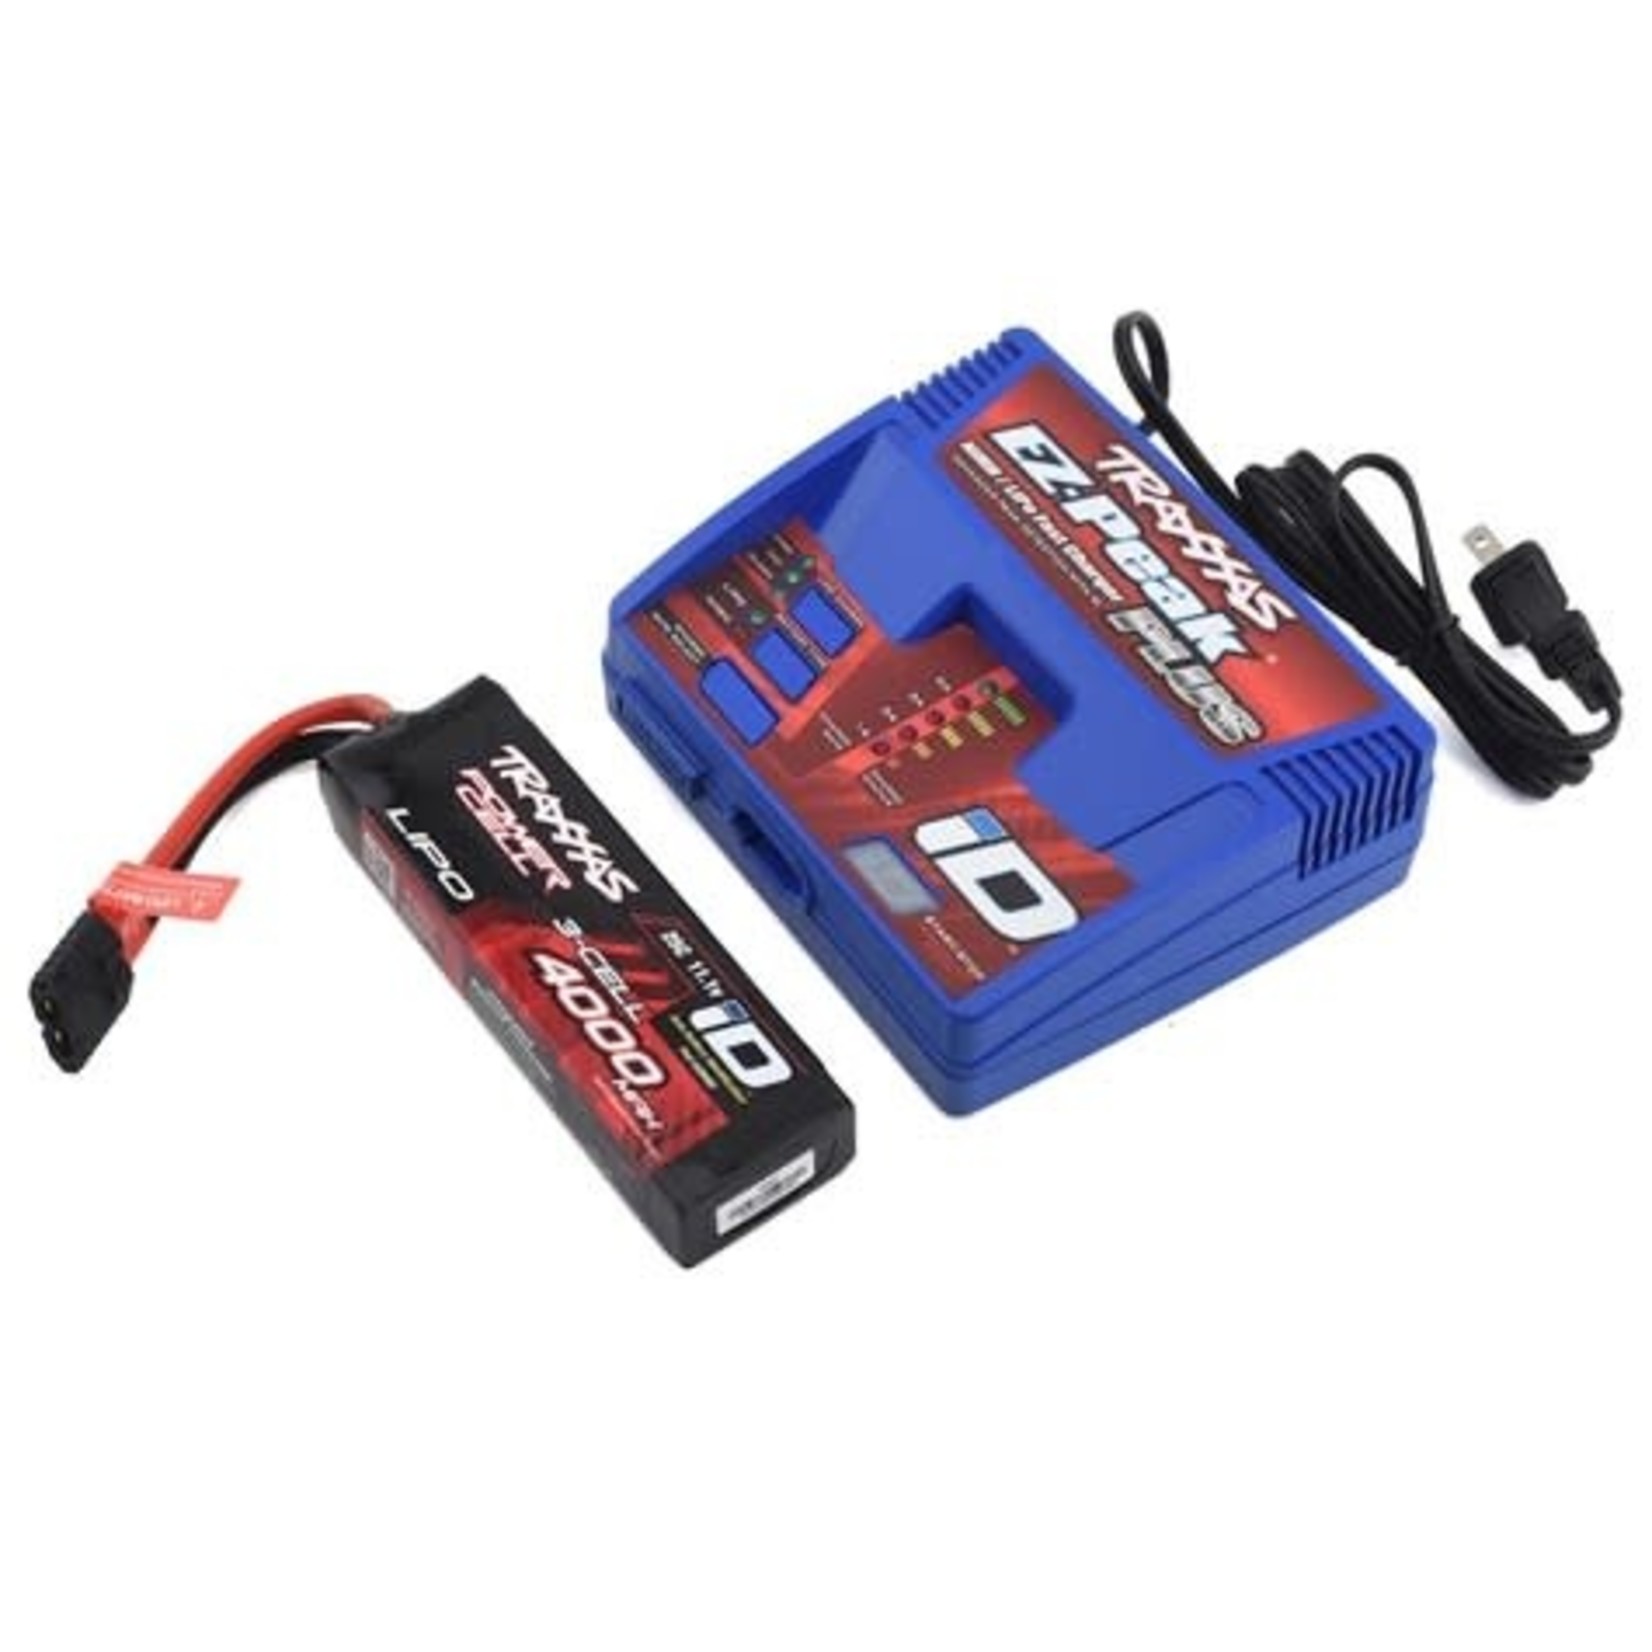 Traxxas Traxxas EZ-Peak 3S Single "Completer Pack" Multi-Chemistry Battery Charger  w/One Power Cell Battery (4000mAh) #2994